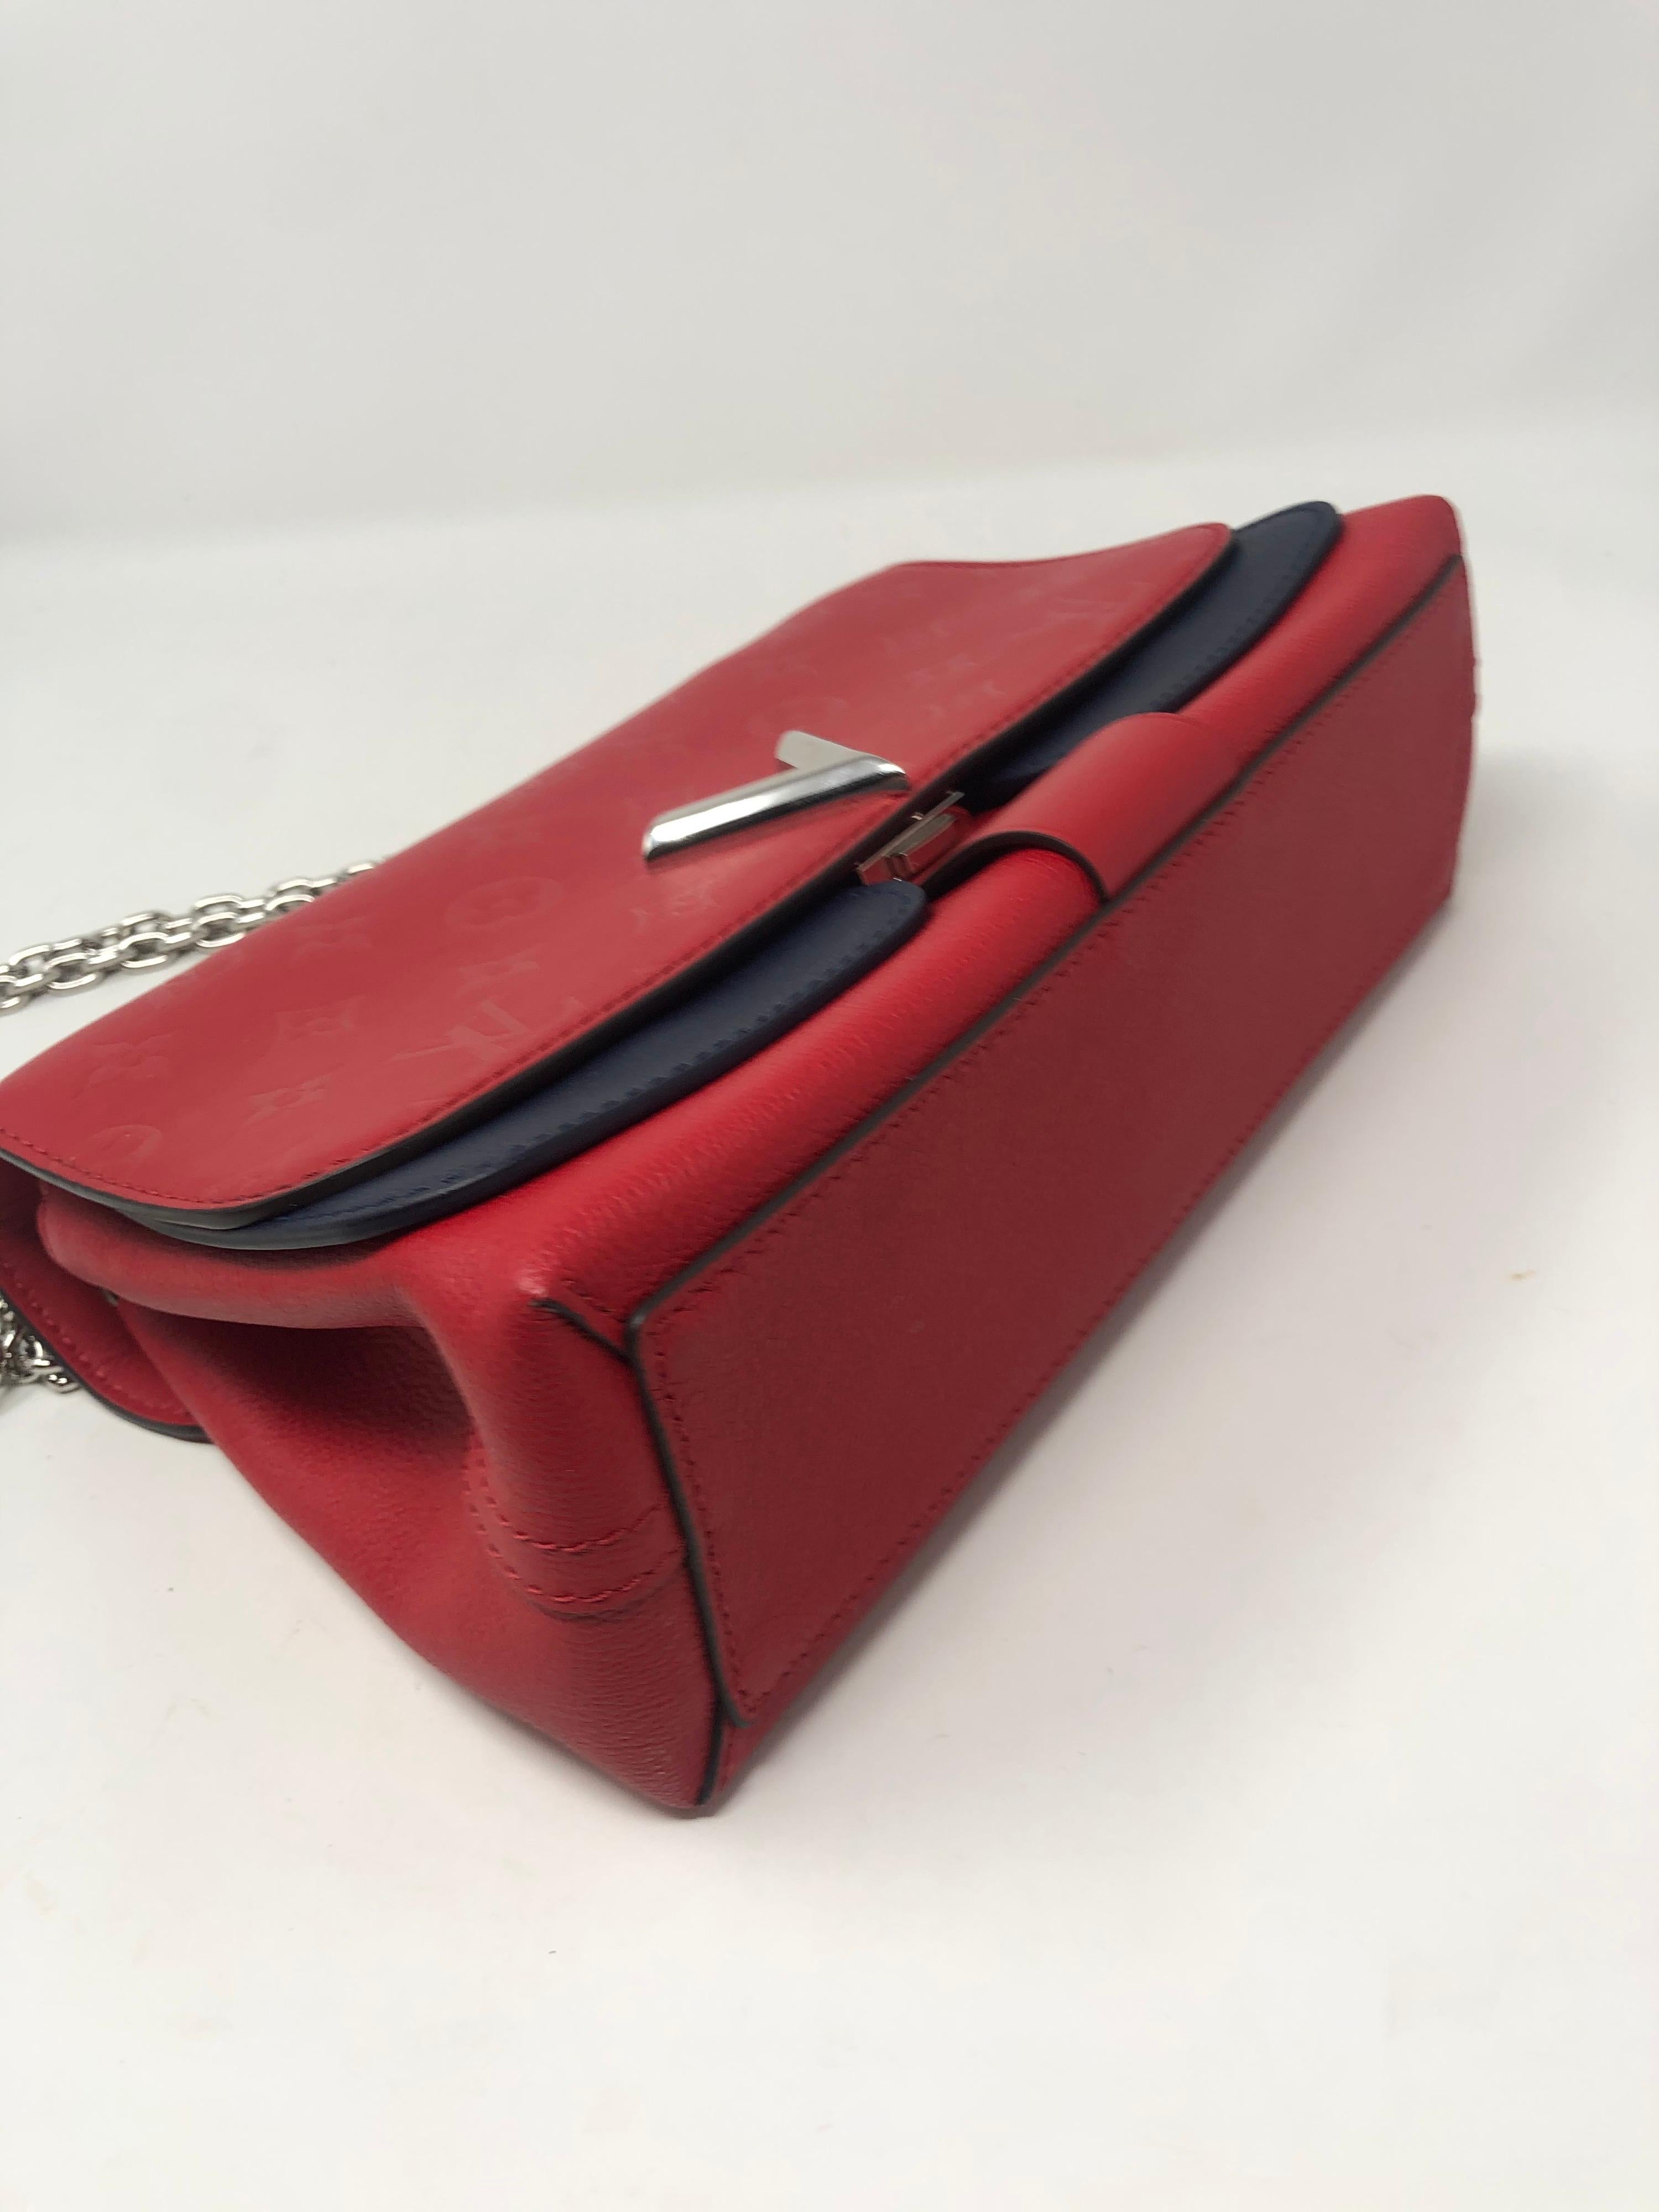 Louis Vuitton Limited Edition Red and Navy Crossbody Bag 7